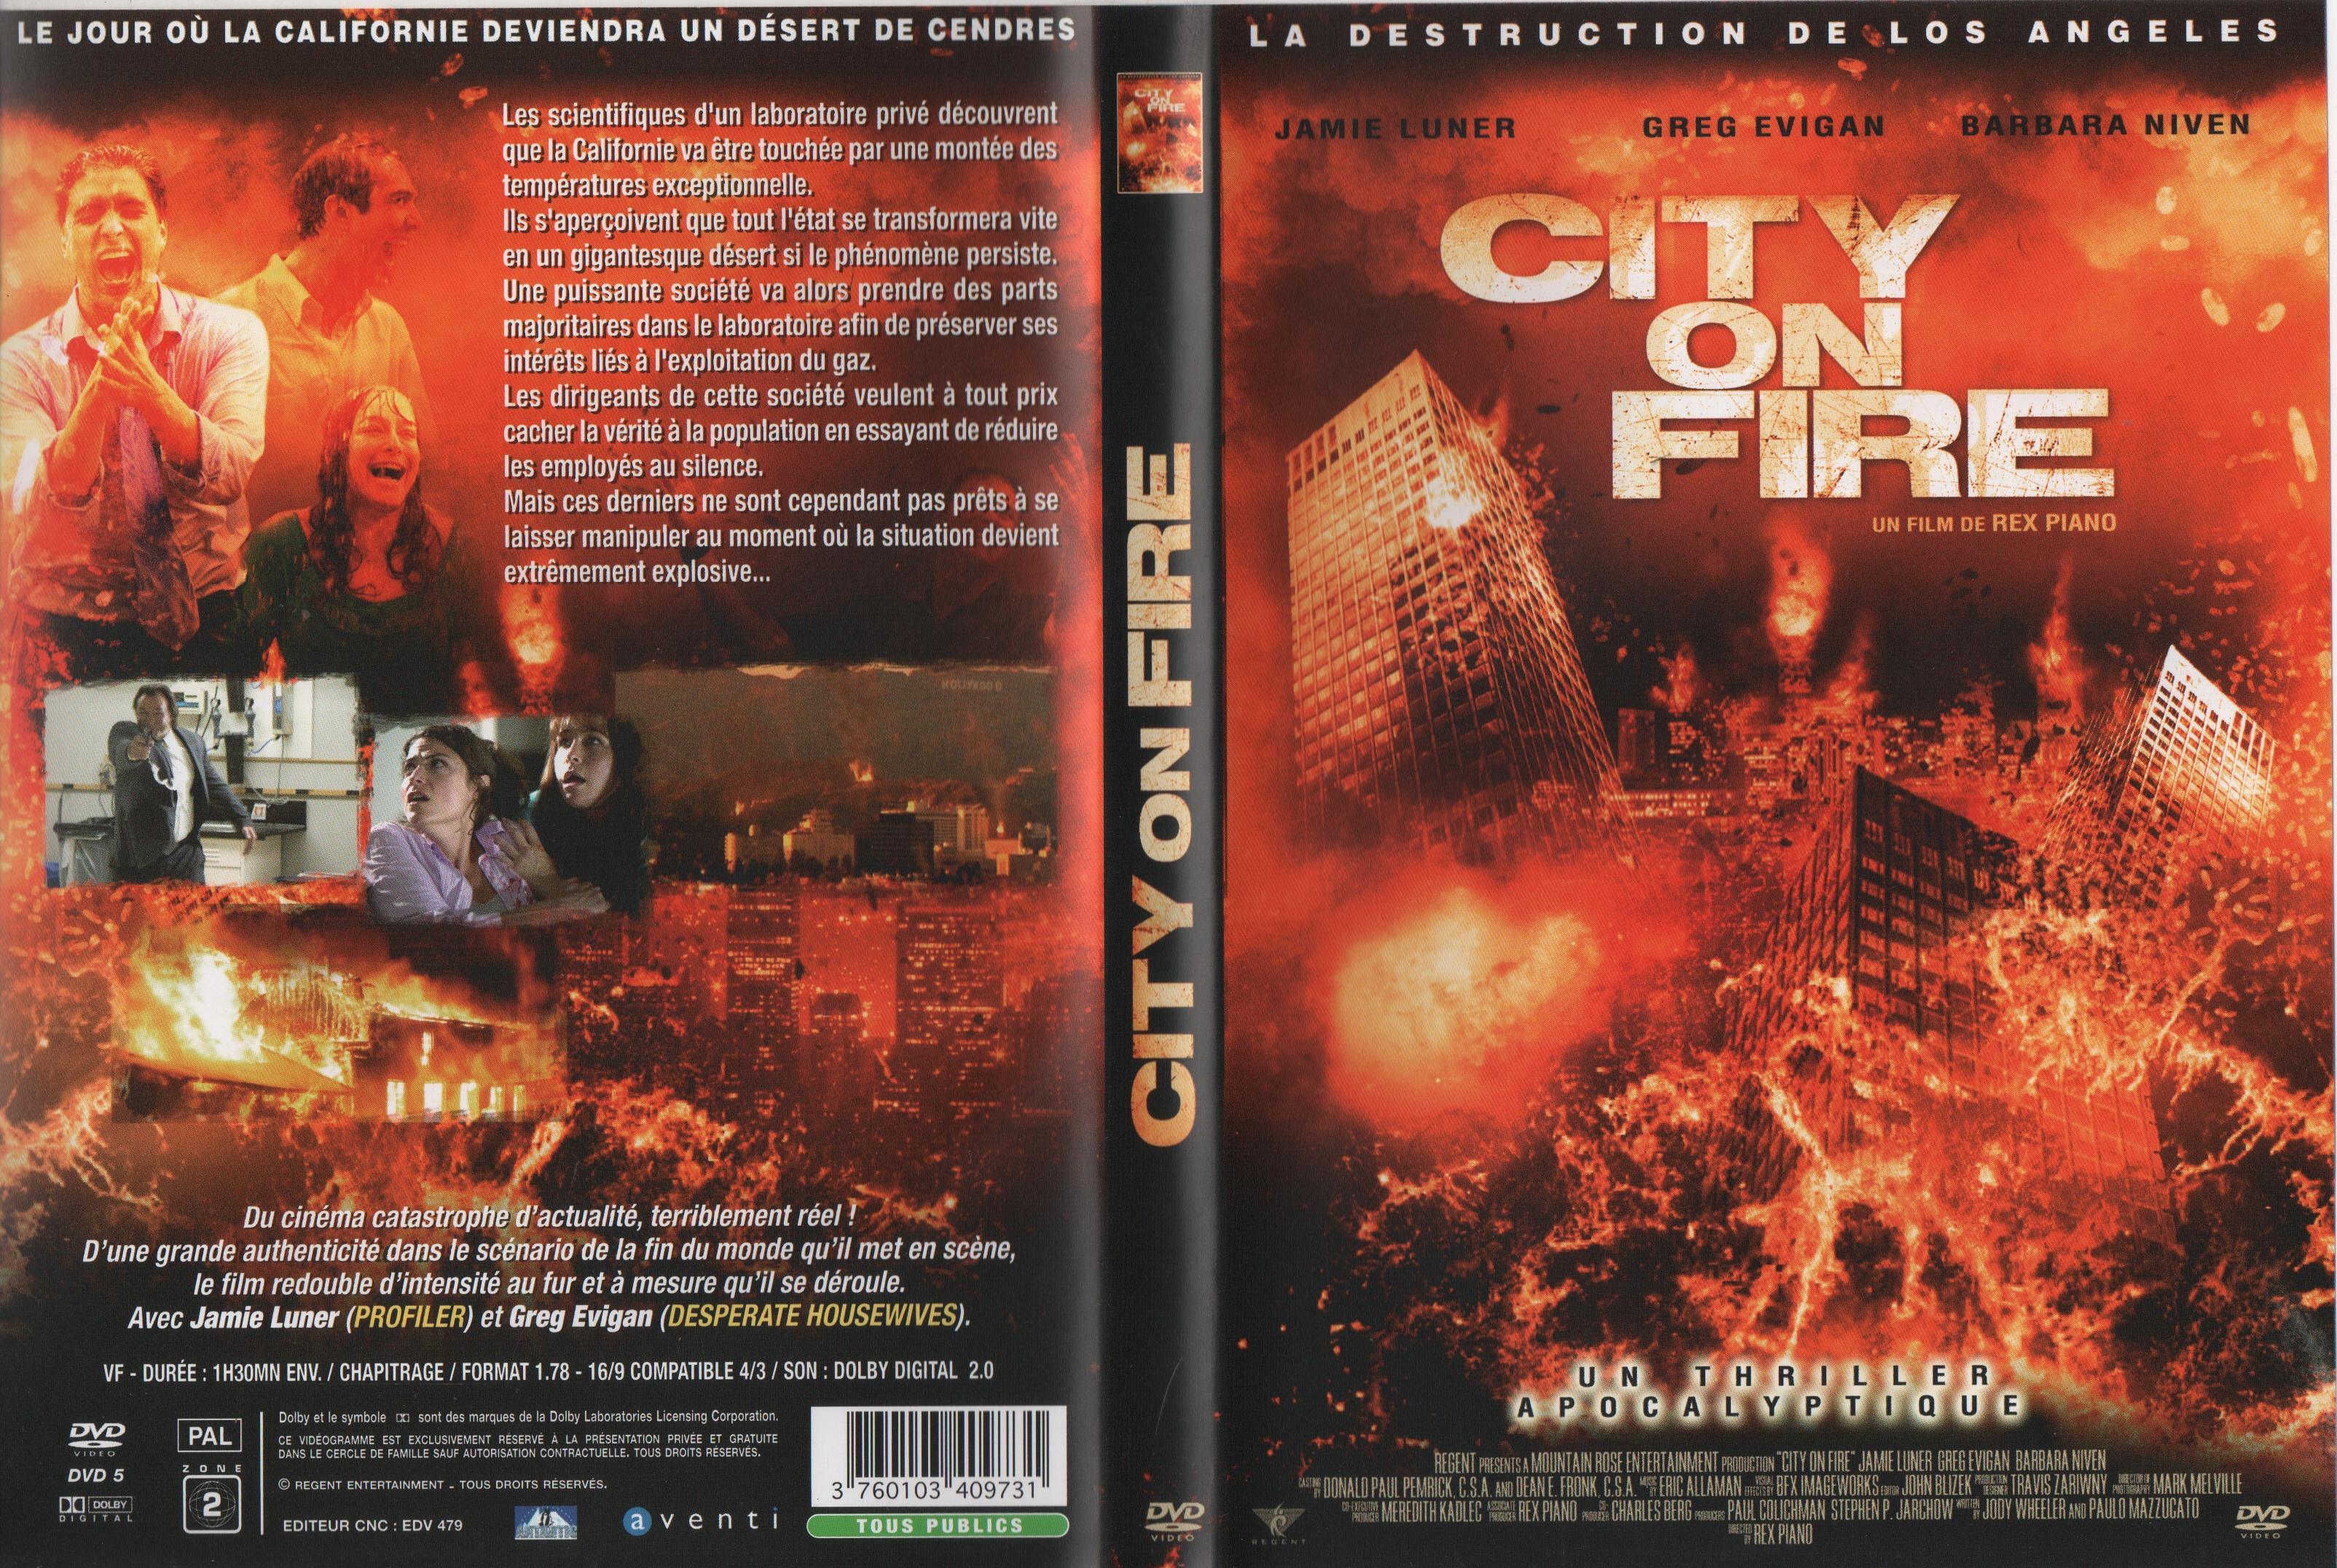 Jaquette DVD City on fire